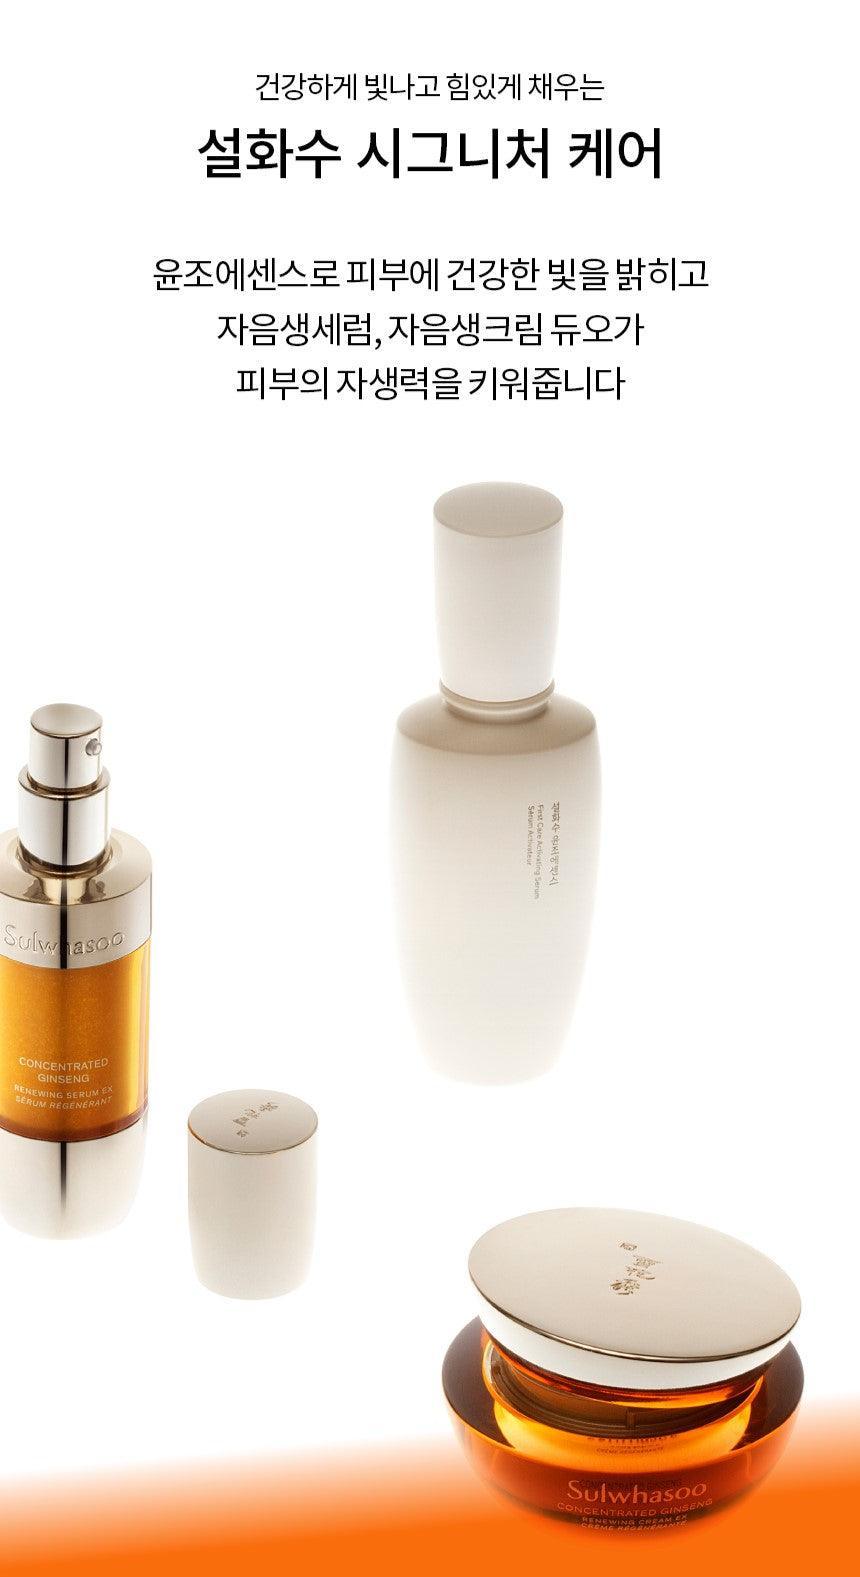 Tinh Chất Dưỡng Sulwhasoo First Care Activating Serum Limited Edition - Kallos Vietnam